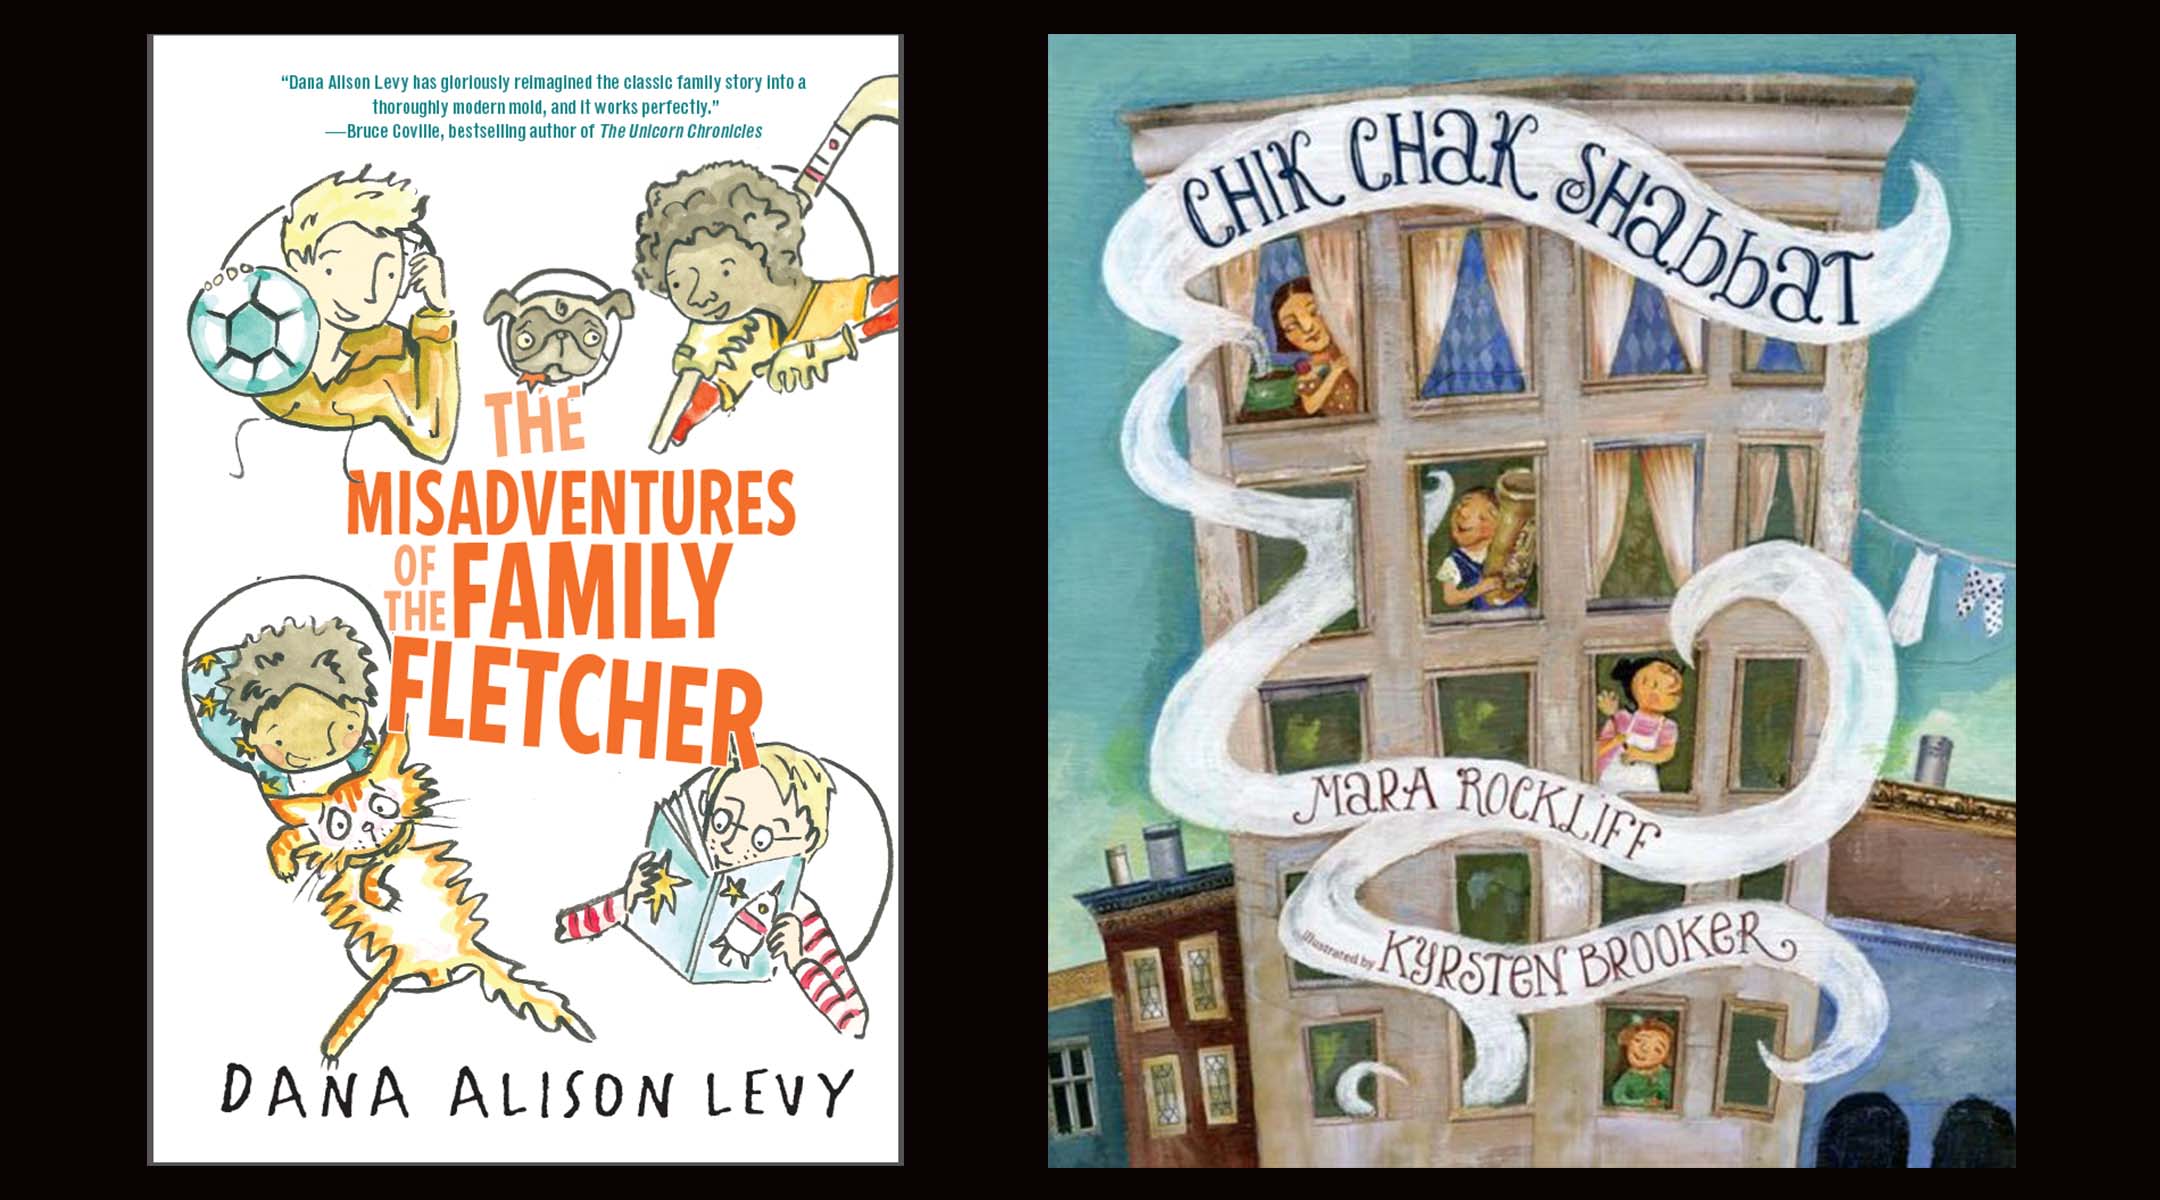 The covers for the Jewish books “Chik Chak Shabbat,” by Mara Rockliff, and “The Misadventures of the Family Fletcher,” by Dana Alison Levy. (Yearling/Candlewick Press)